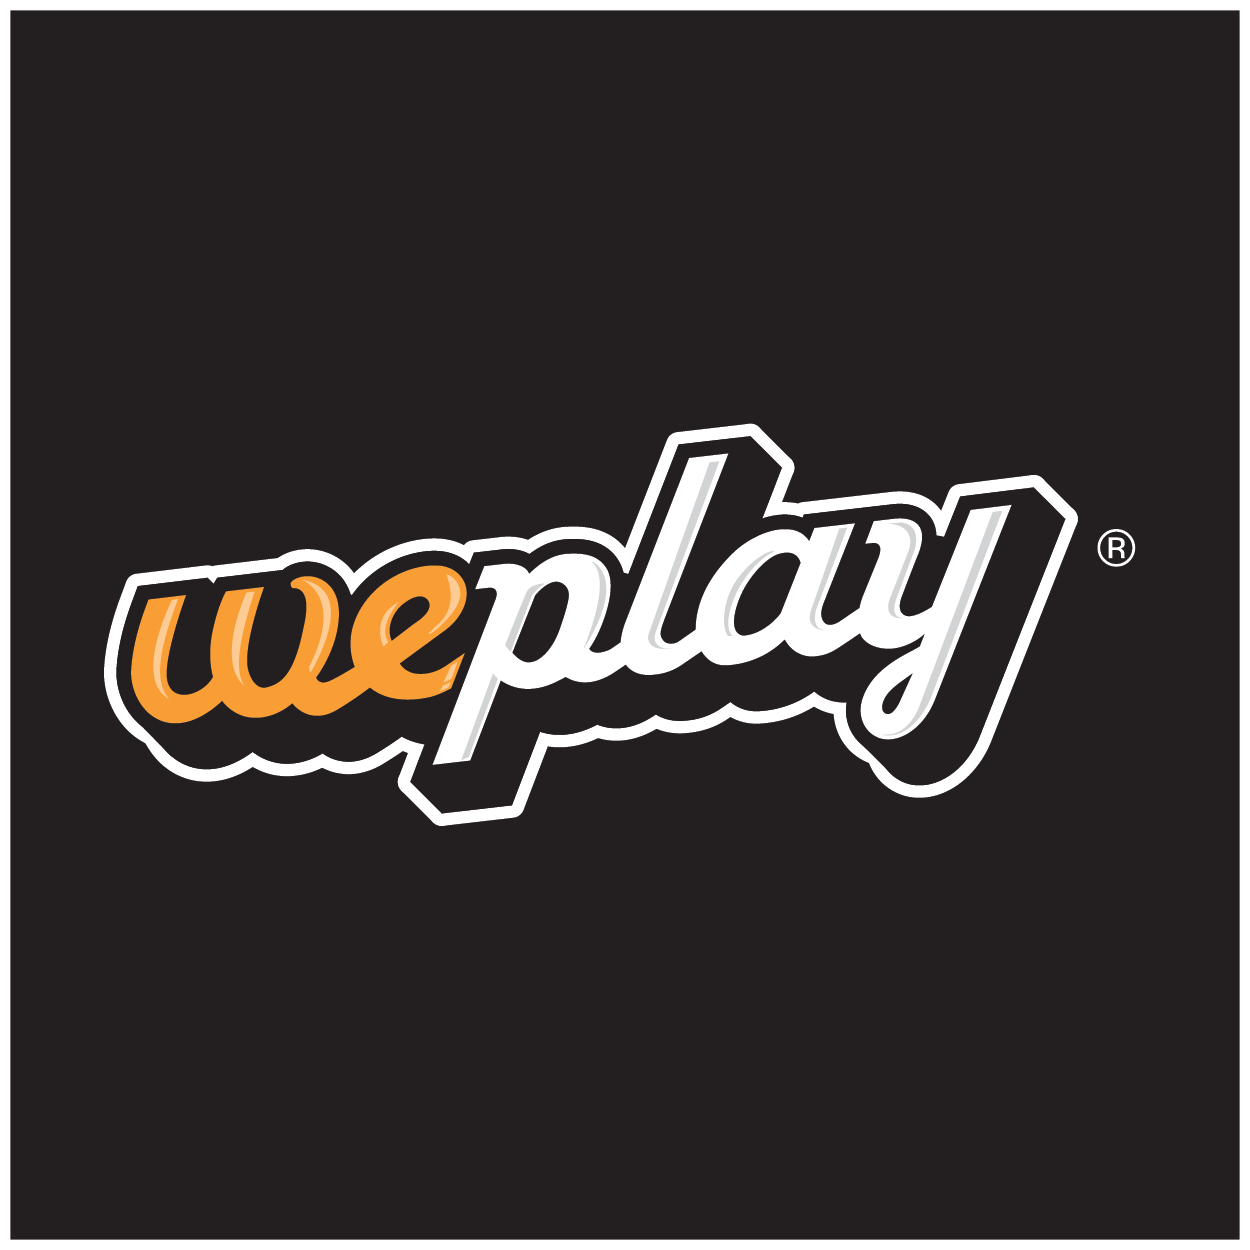 Weplay Logo - Click to Download